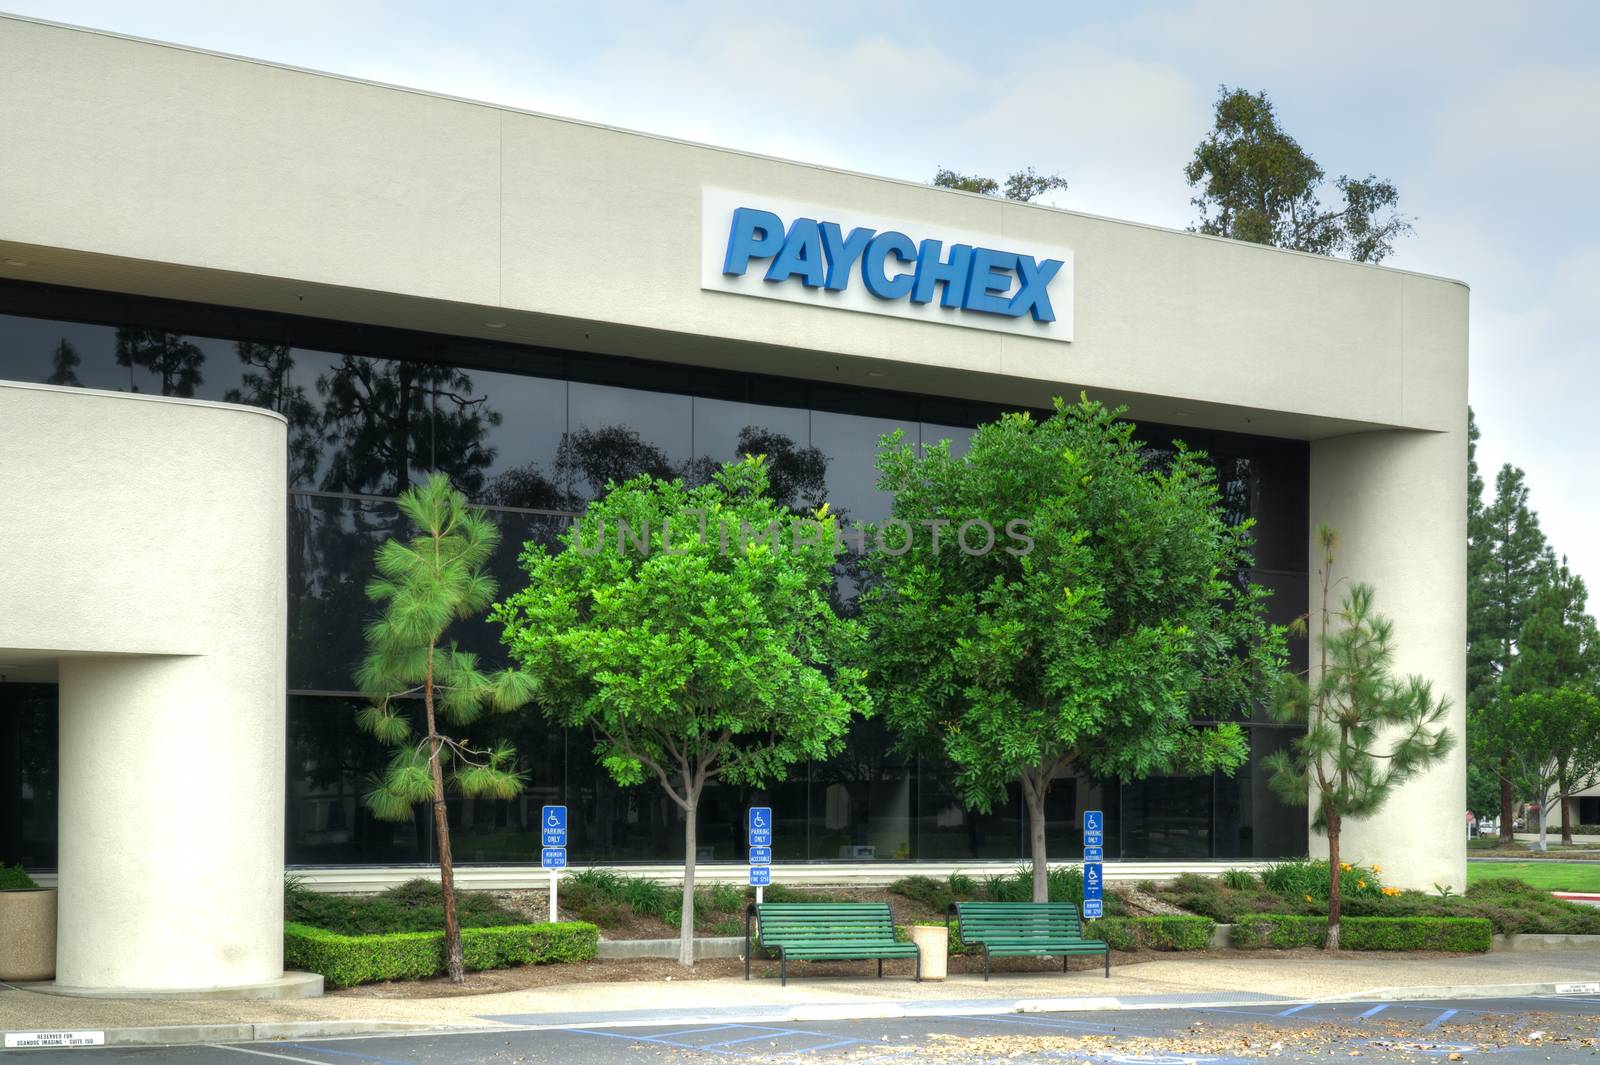 Paychex Corporate Building by wolterk